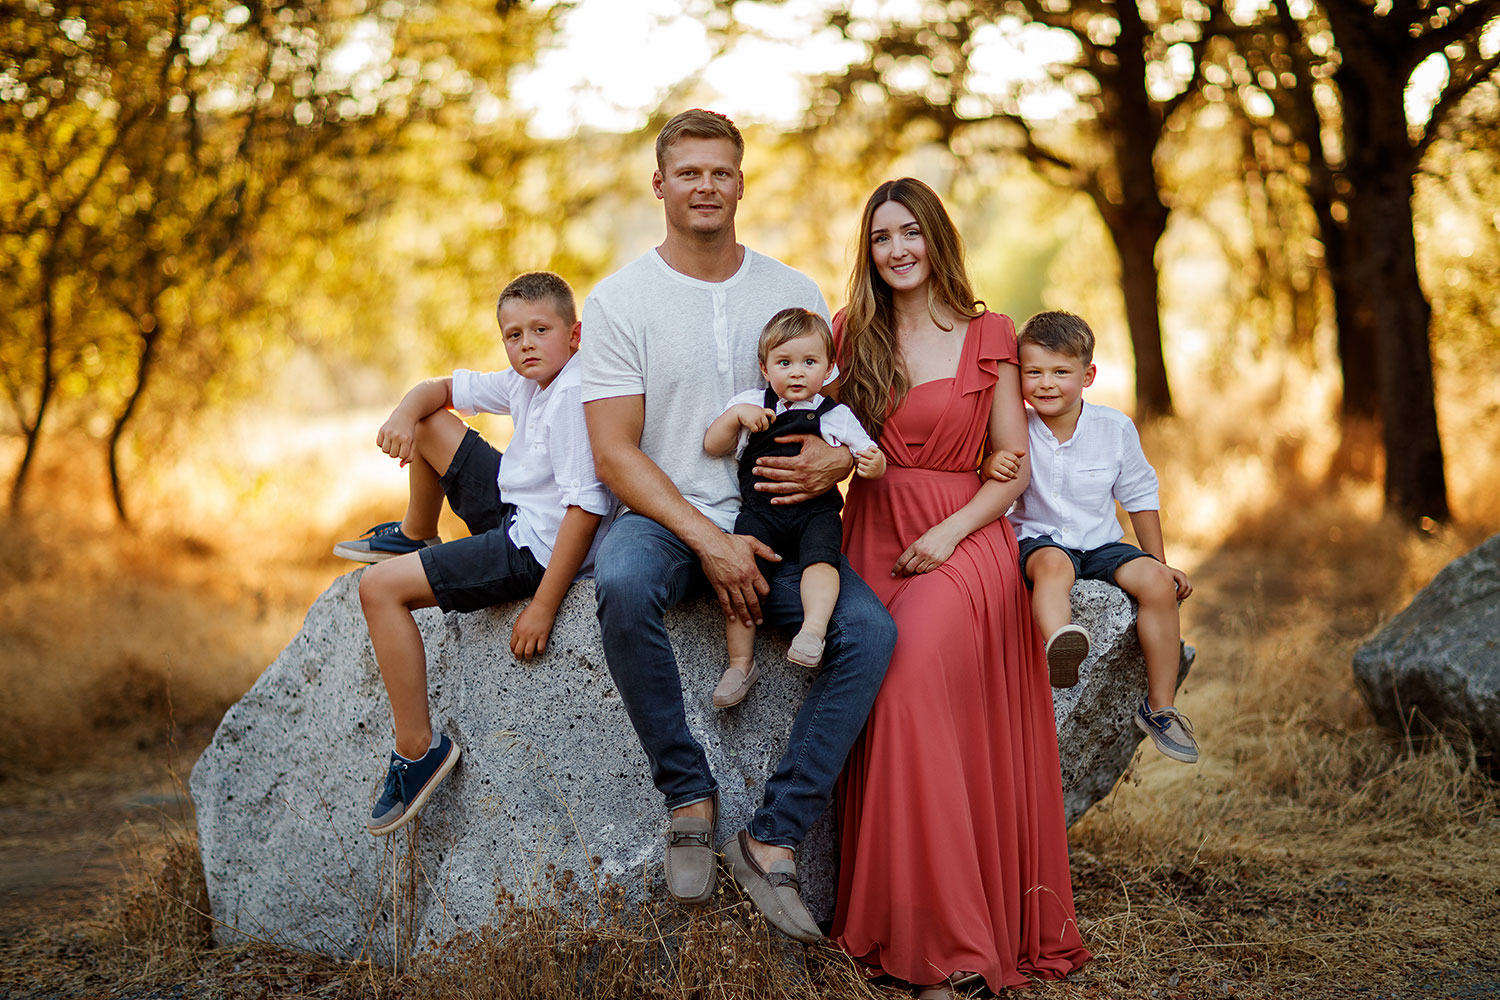 10 Tips for Creating Great Family Portraits